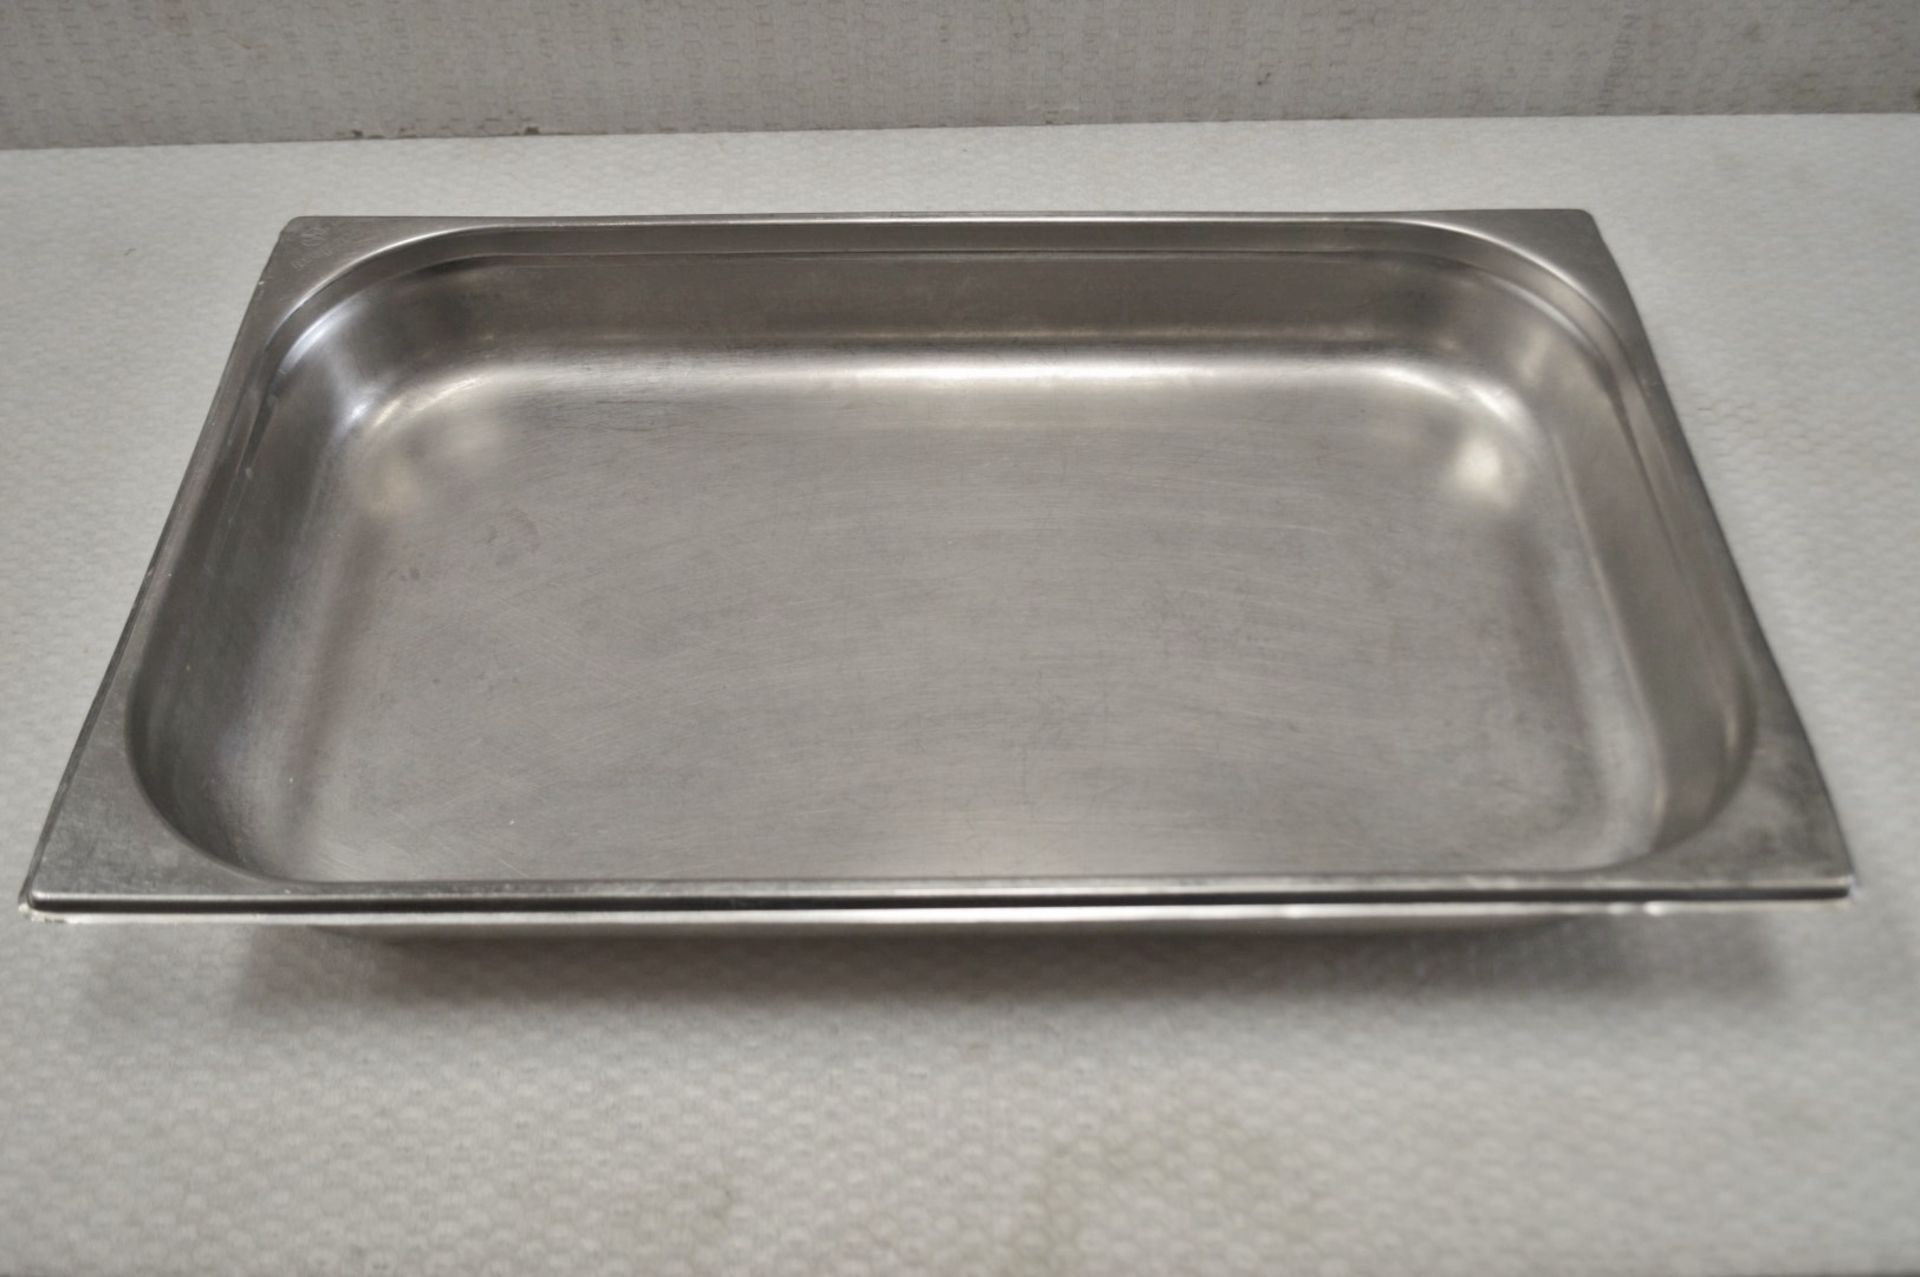 12 x Stainless Steel Gastronorm Trays - Dimensions: L53 x W32 cm - Recently Removed From A